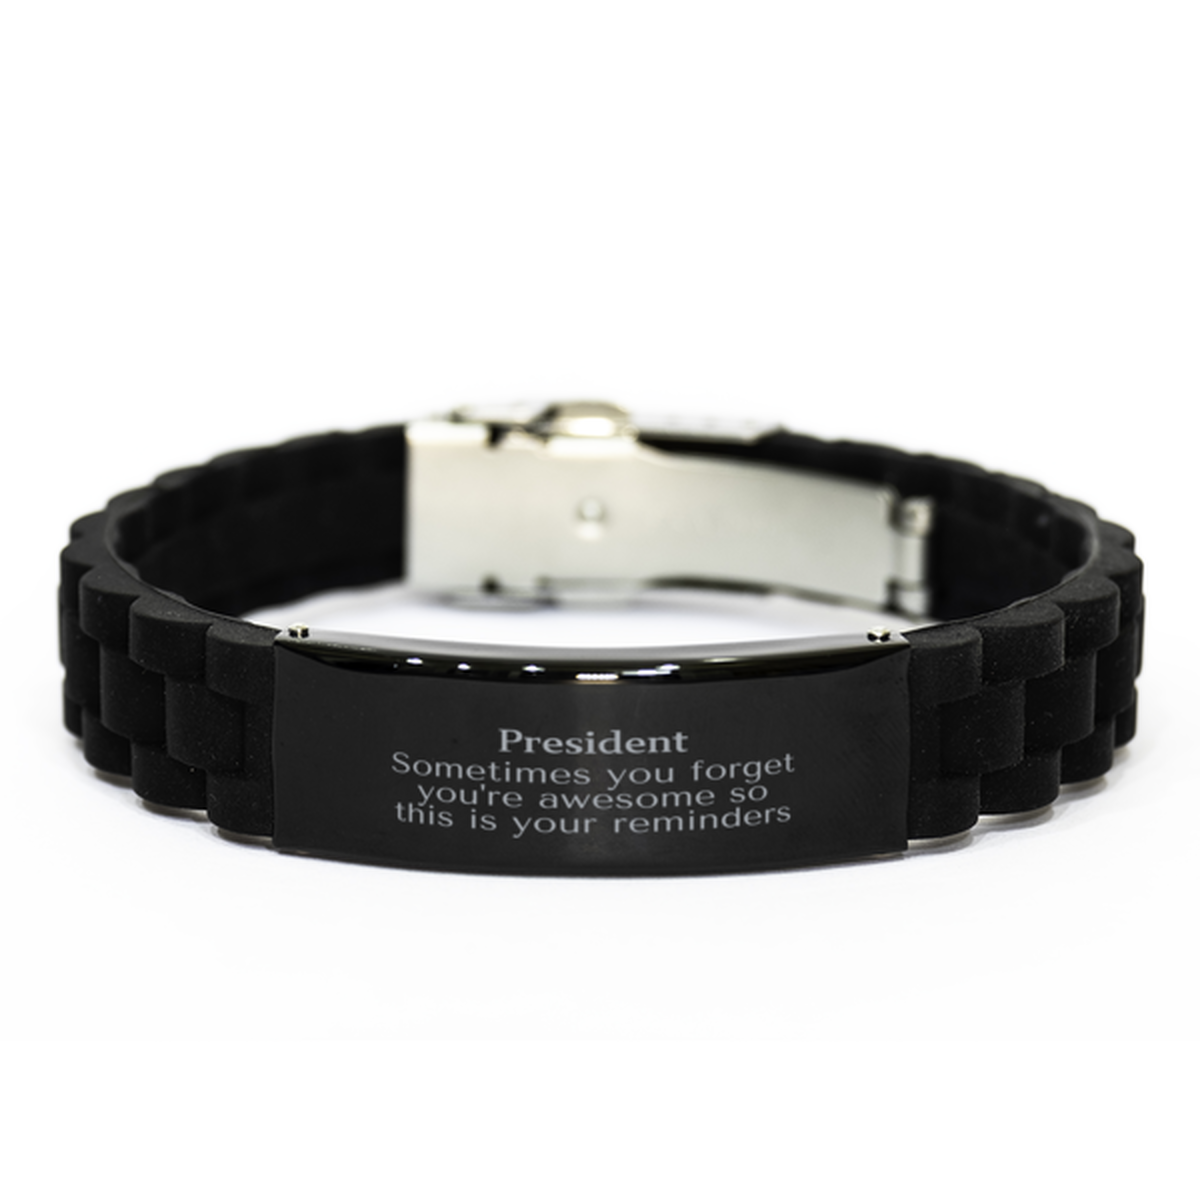 Sentimental President Black Glidelock Clasp Bracelet, President Sometimes you forget you're awesome so this is your reminders, Graduation Christmas Birthday Gifts for President, Men, Women, Coworkers